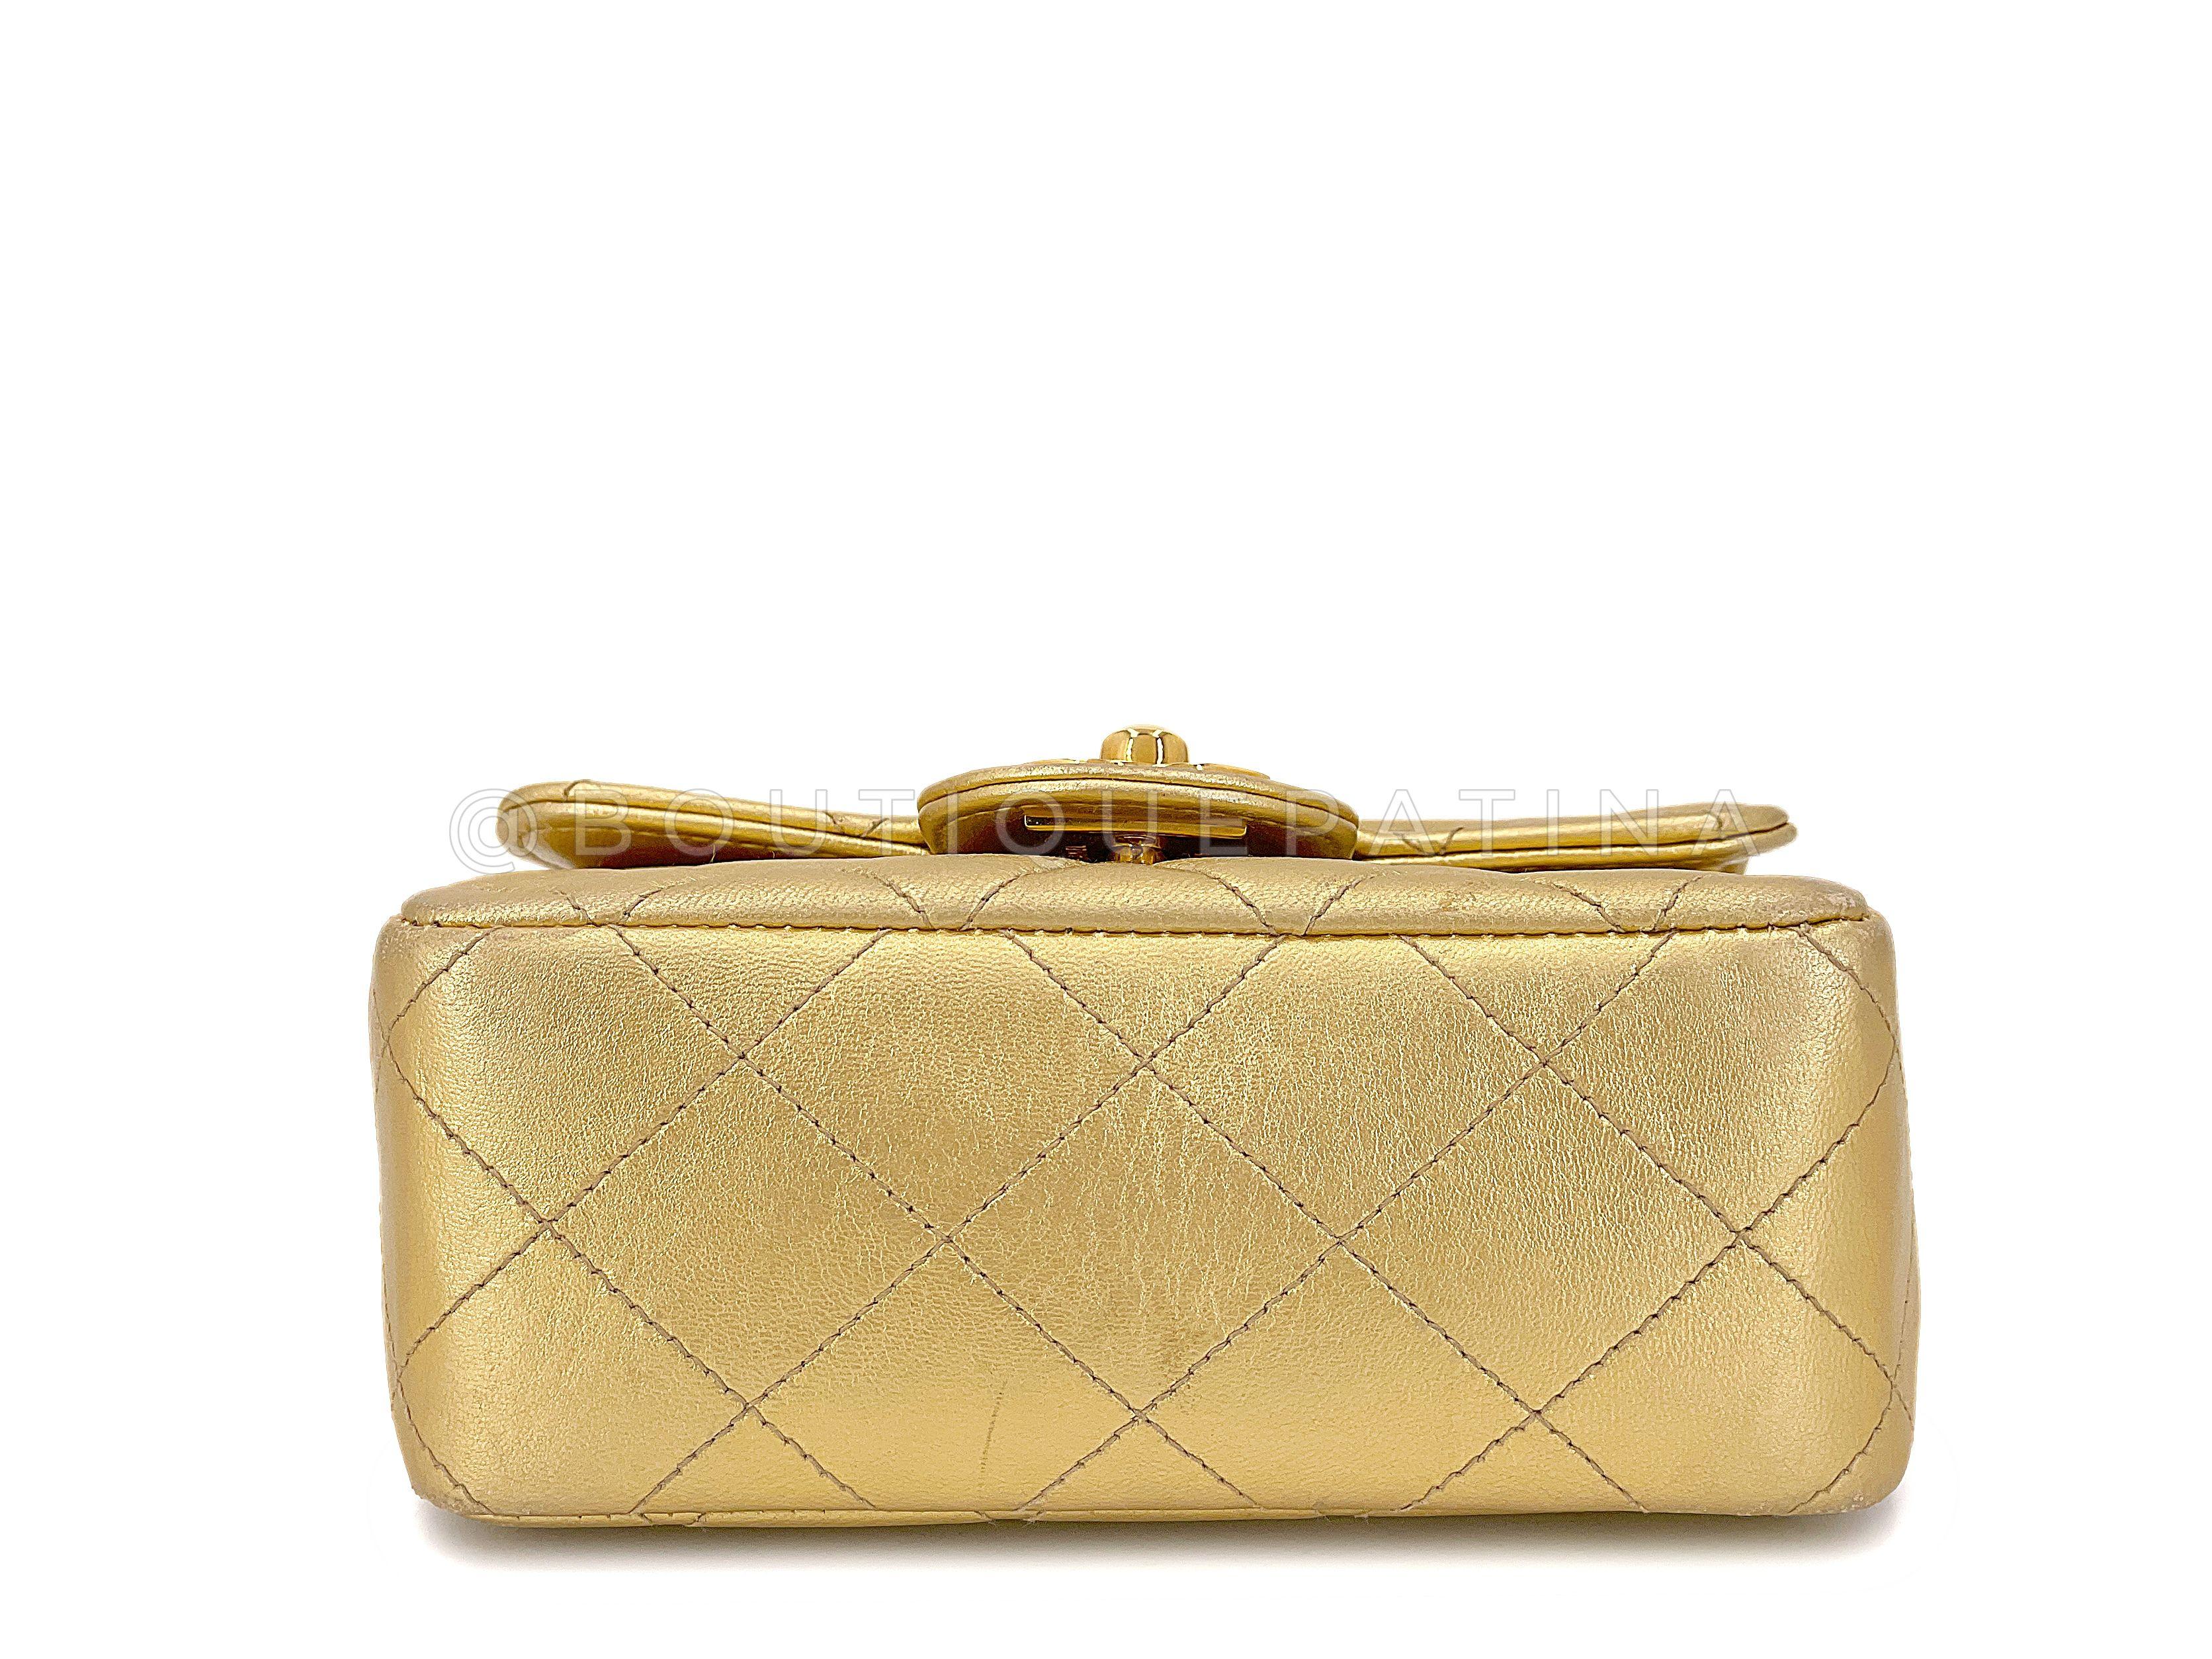 Chanel 1994 Vintage Gold “Child” Extra Square Mini Kelly Bag 67404 For Sale 1